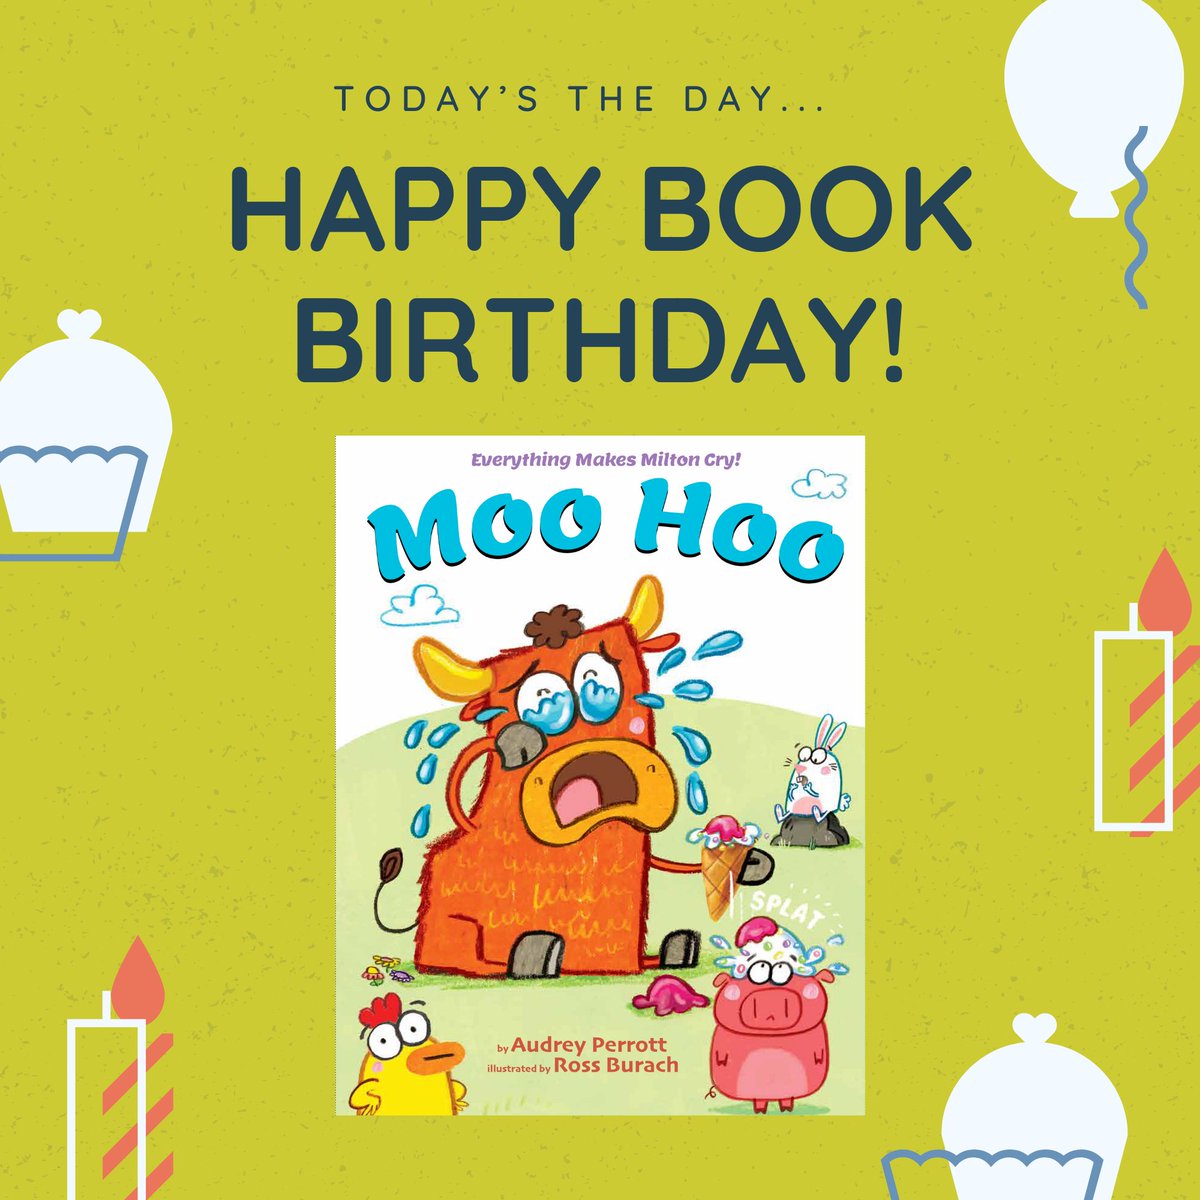 Woo-hoo for MOO HOO’s book birthday today! 🎉🎂🐮 We're crying tears of joy for this warm-hearted, rib-tickling read-aloud by @audreyperrott, illustrated by Ross Burach. Congratulations!!!🥳 #KidLit #WritingCommunity #PictureBook #Debut